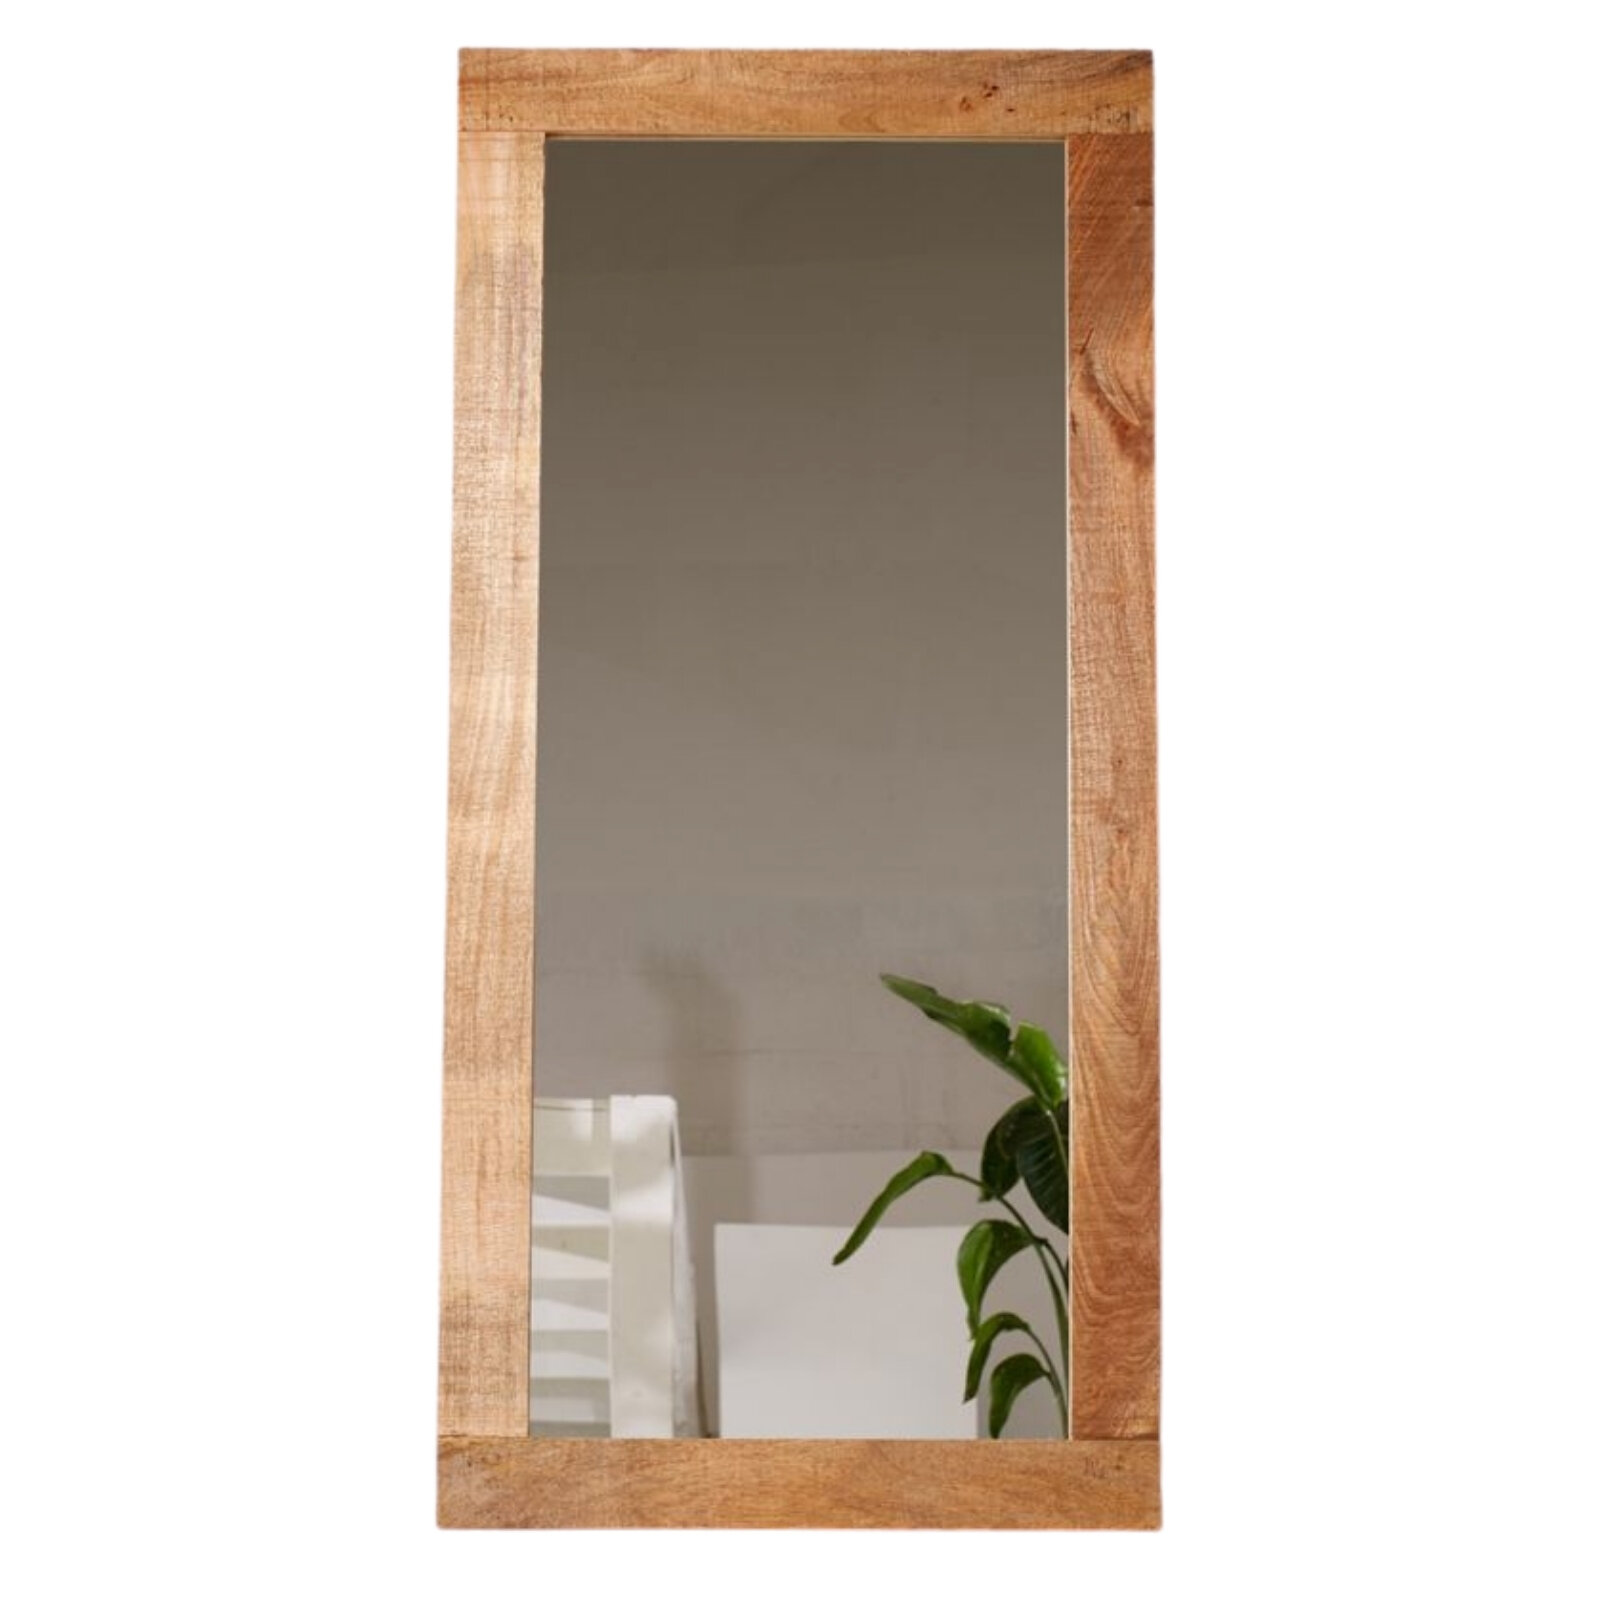 Mango Wood Mirror, Urban Outfitters, $279